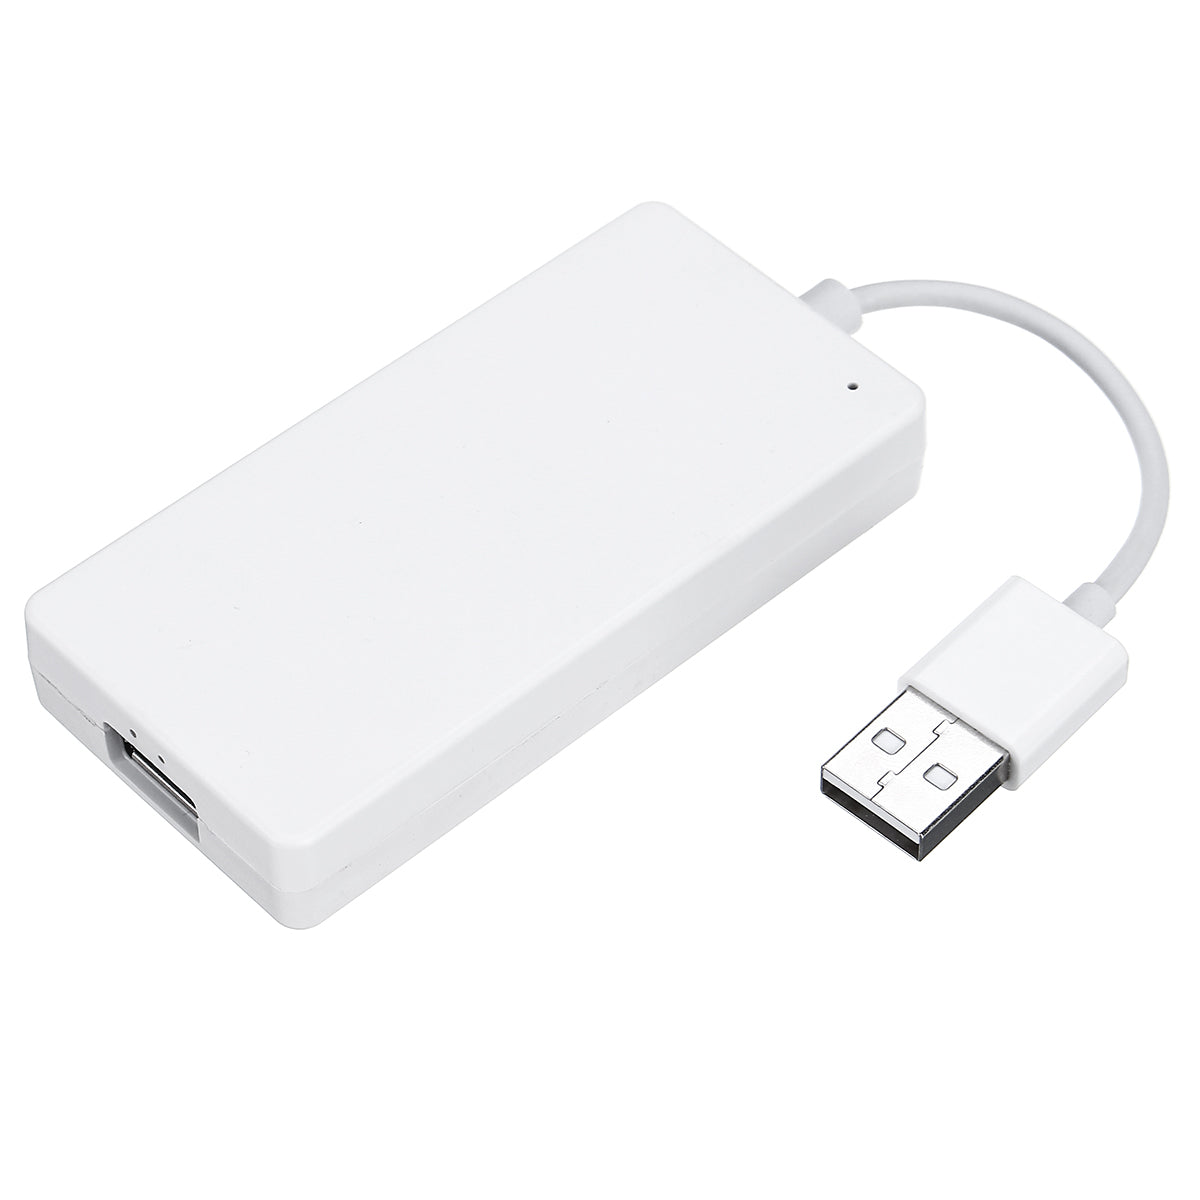 Lavender Wireless bluetooth Display Dongle White for IPhone Carplay Mode and Android Carplay Mode